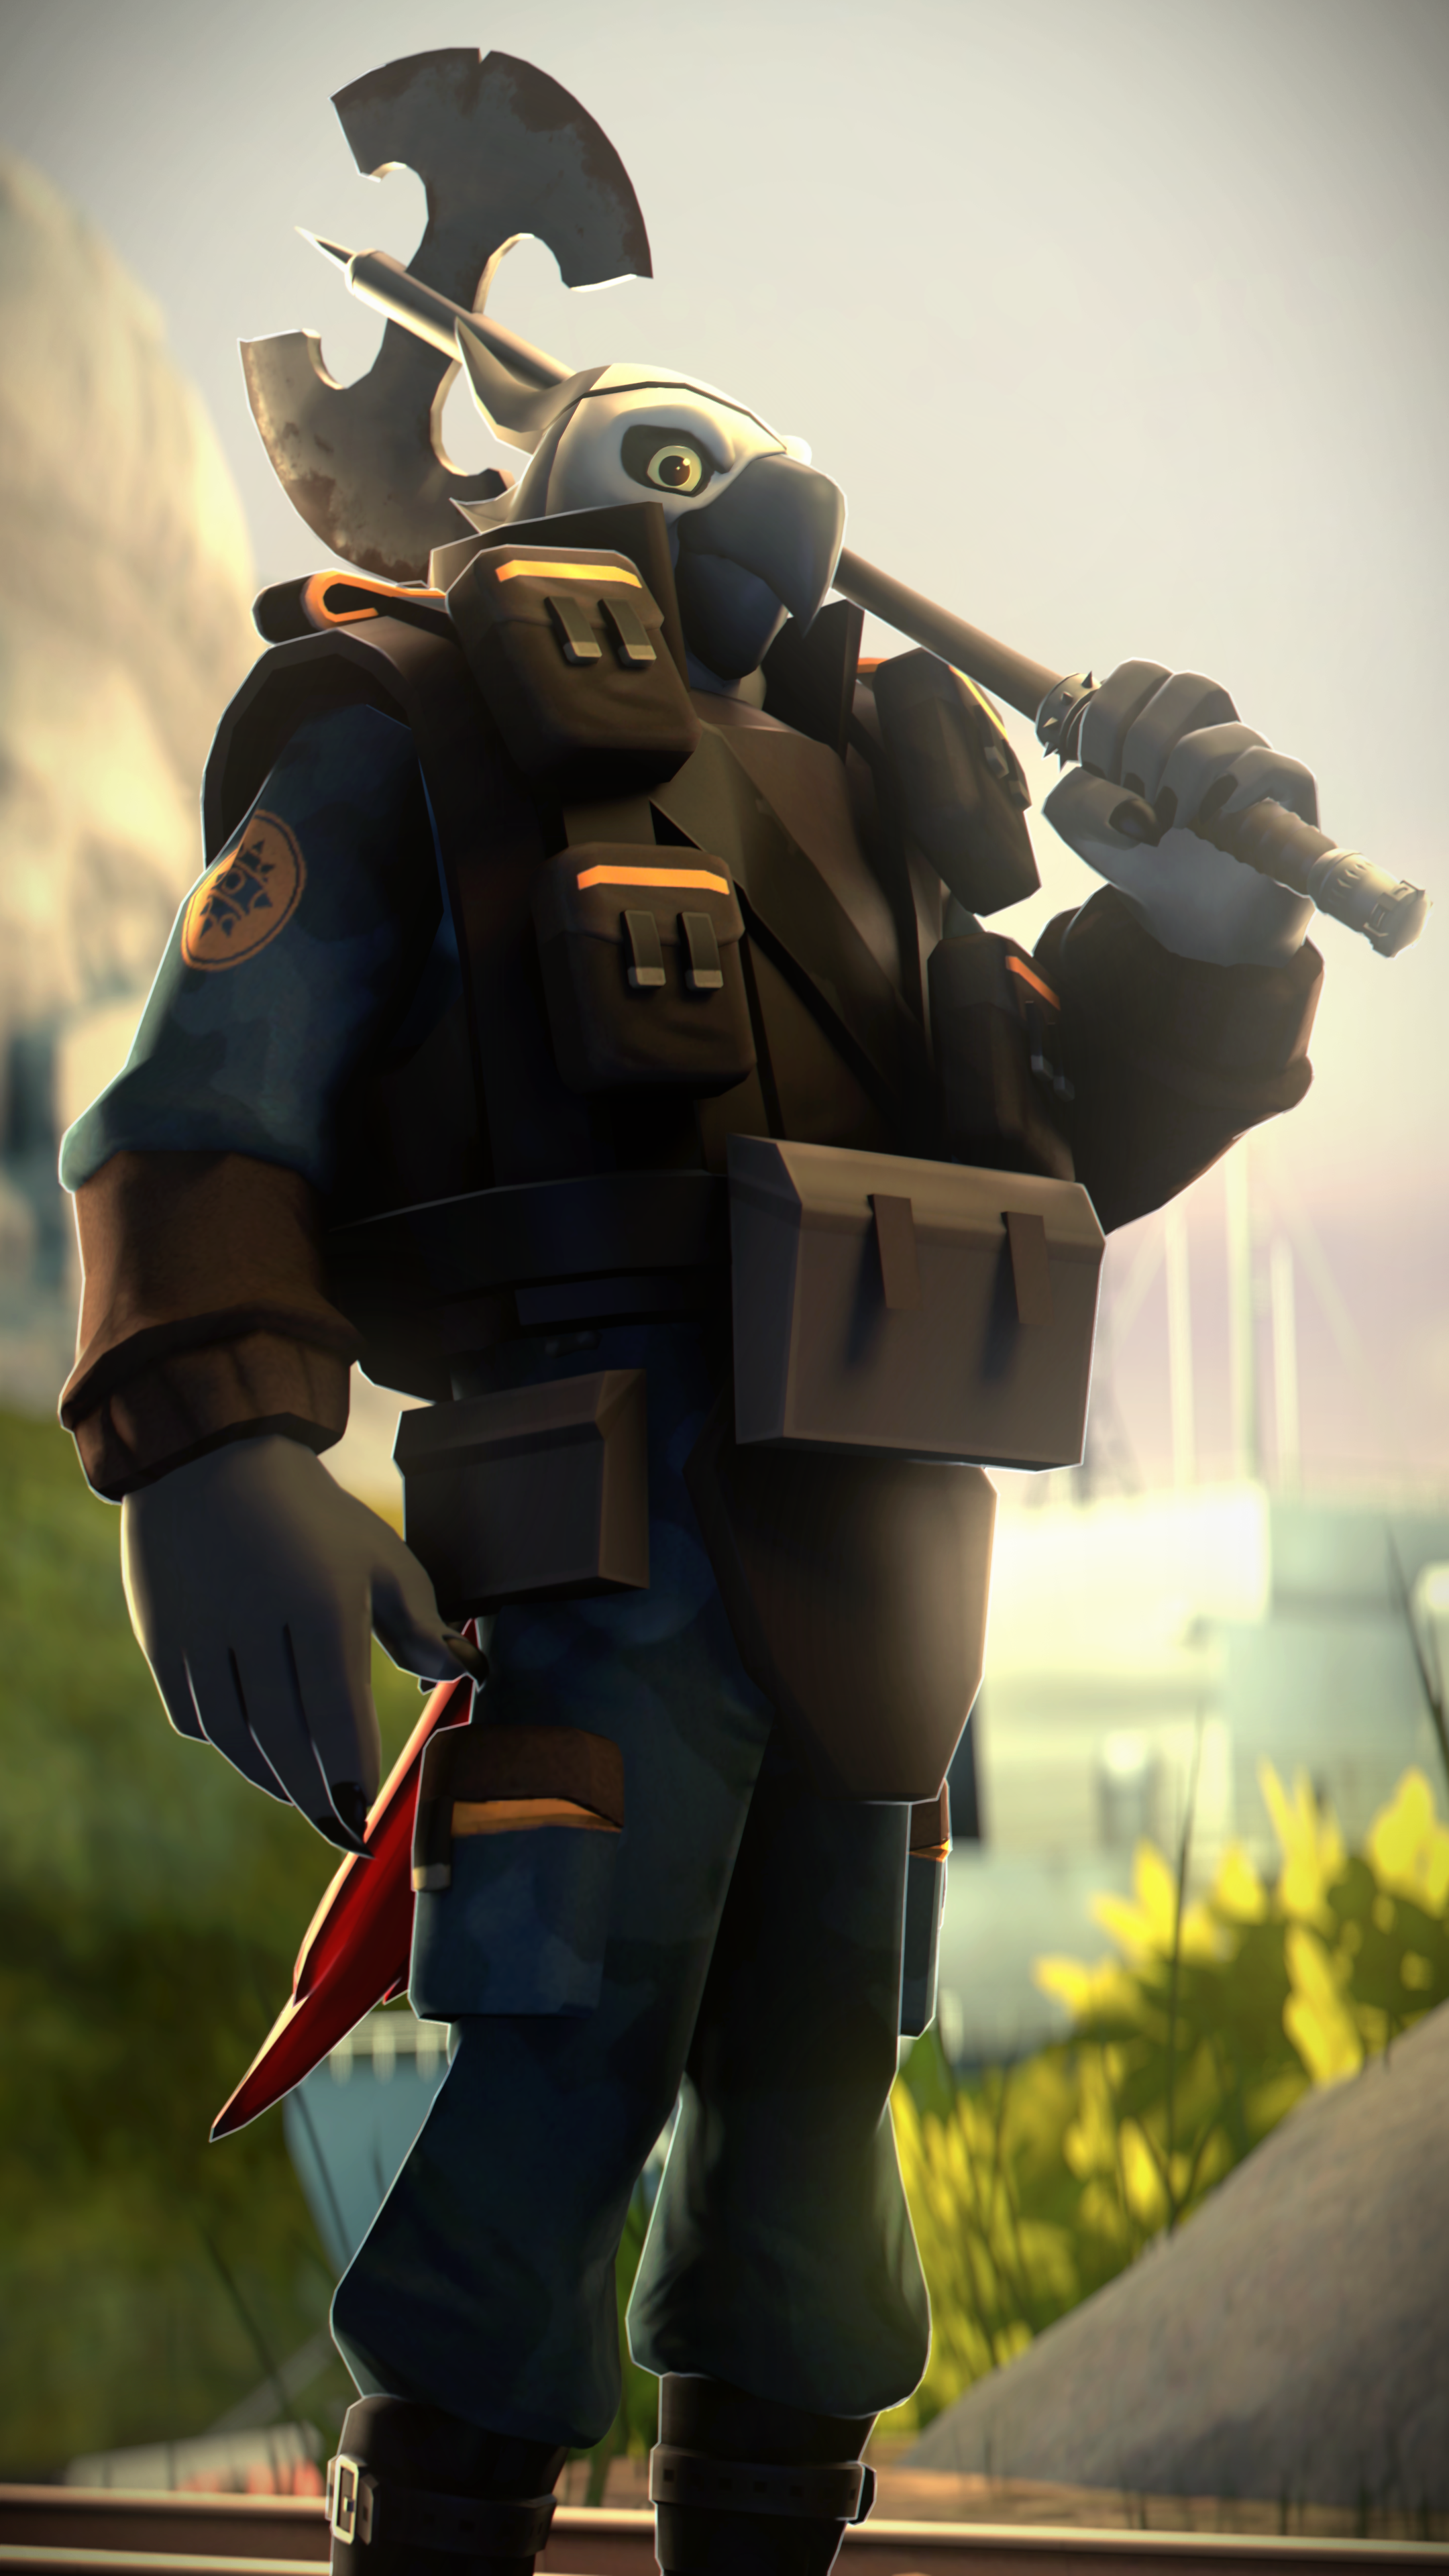 general_grey_by_kristergs-dbhexd0.png